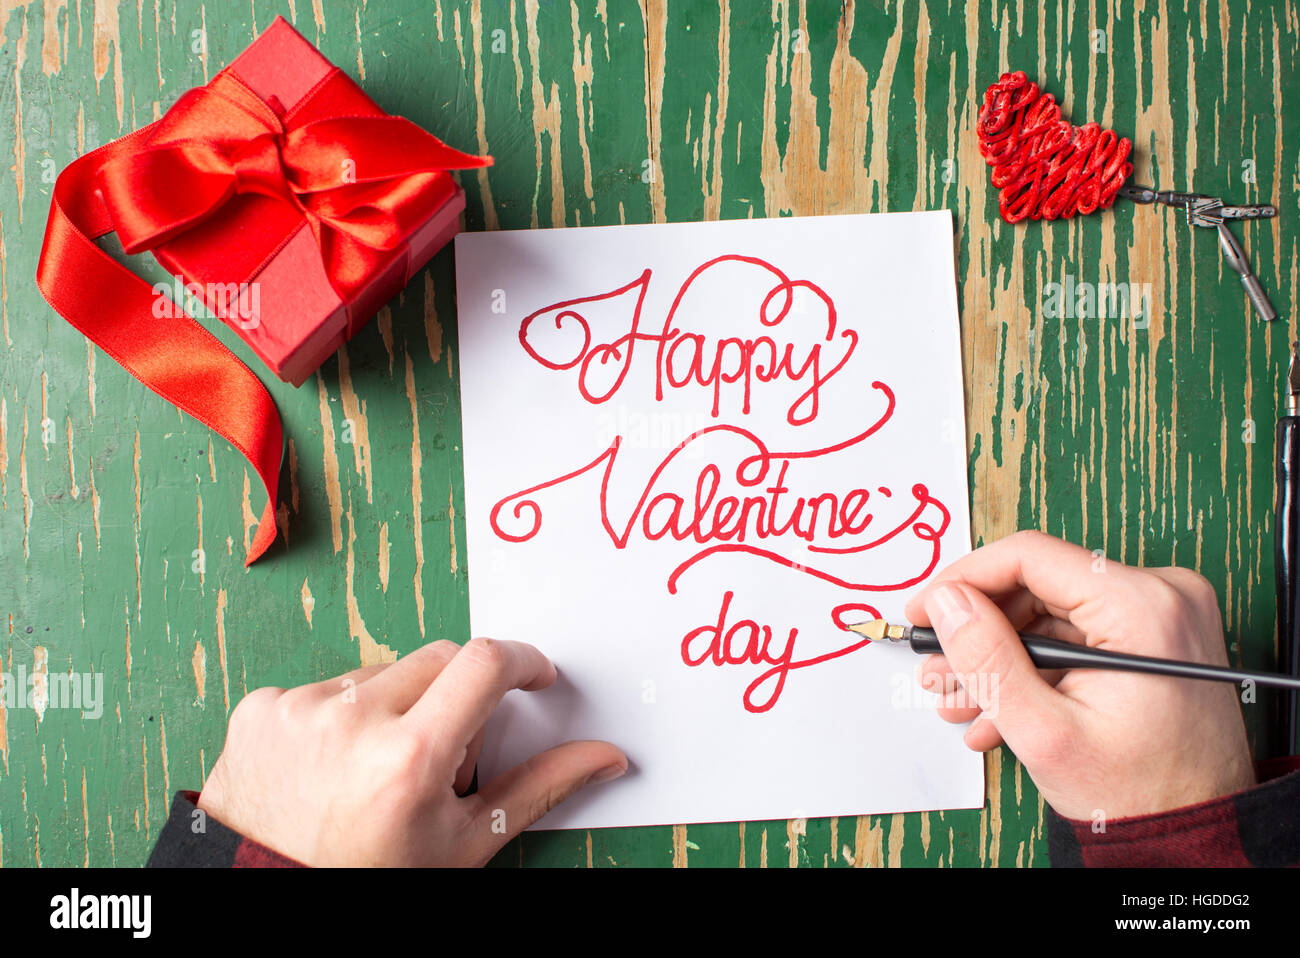 Man writing a Valentines day card and preparing a present Stock Photo